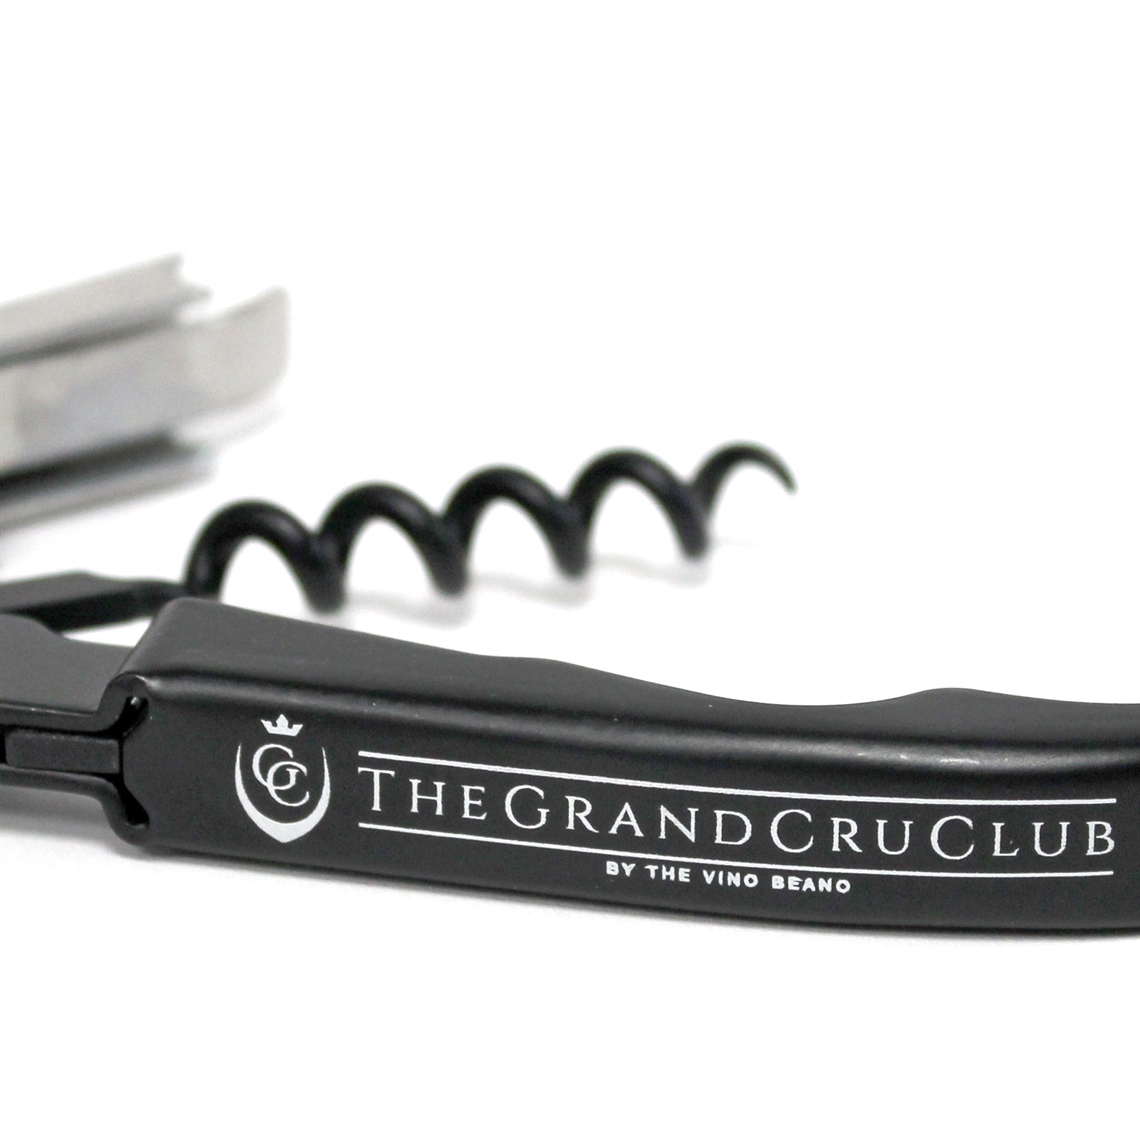 View more coutale sommelier from our Branded Corkscrews & Bottle Openers range